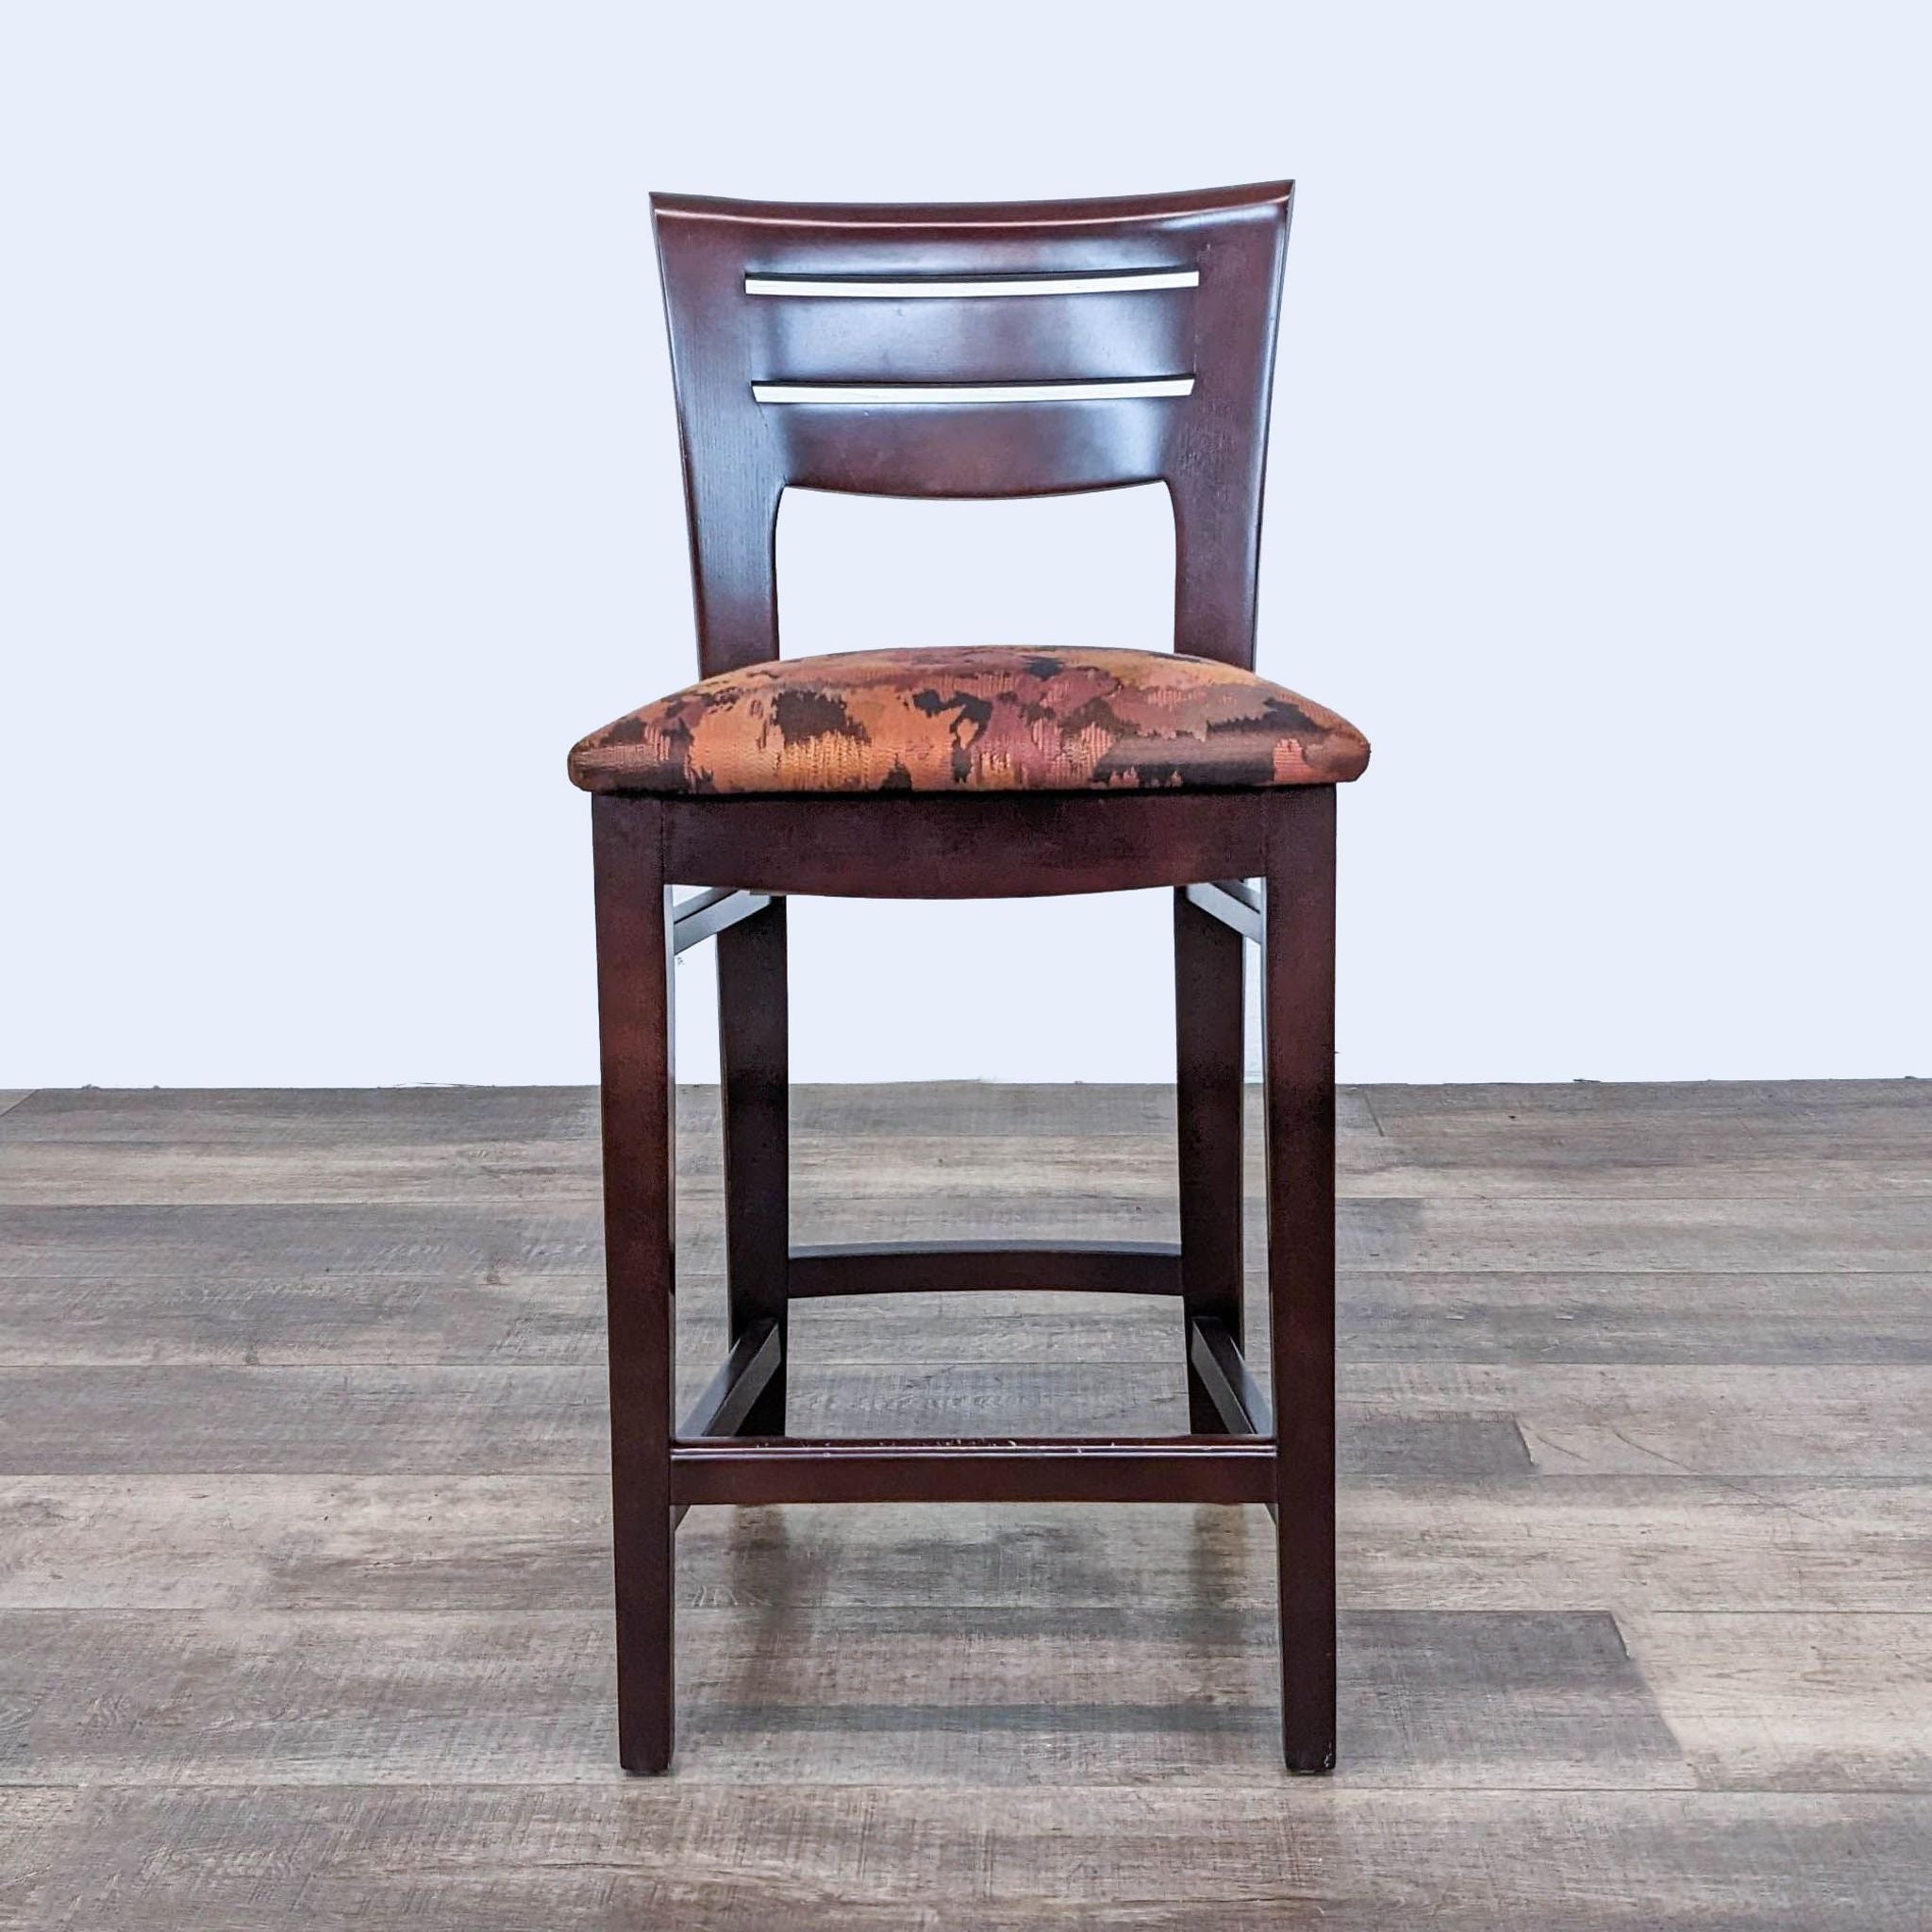 Reperch stool with a dark wood frame and seat covered in earth-toned fabric pattern.